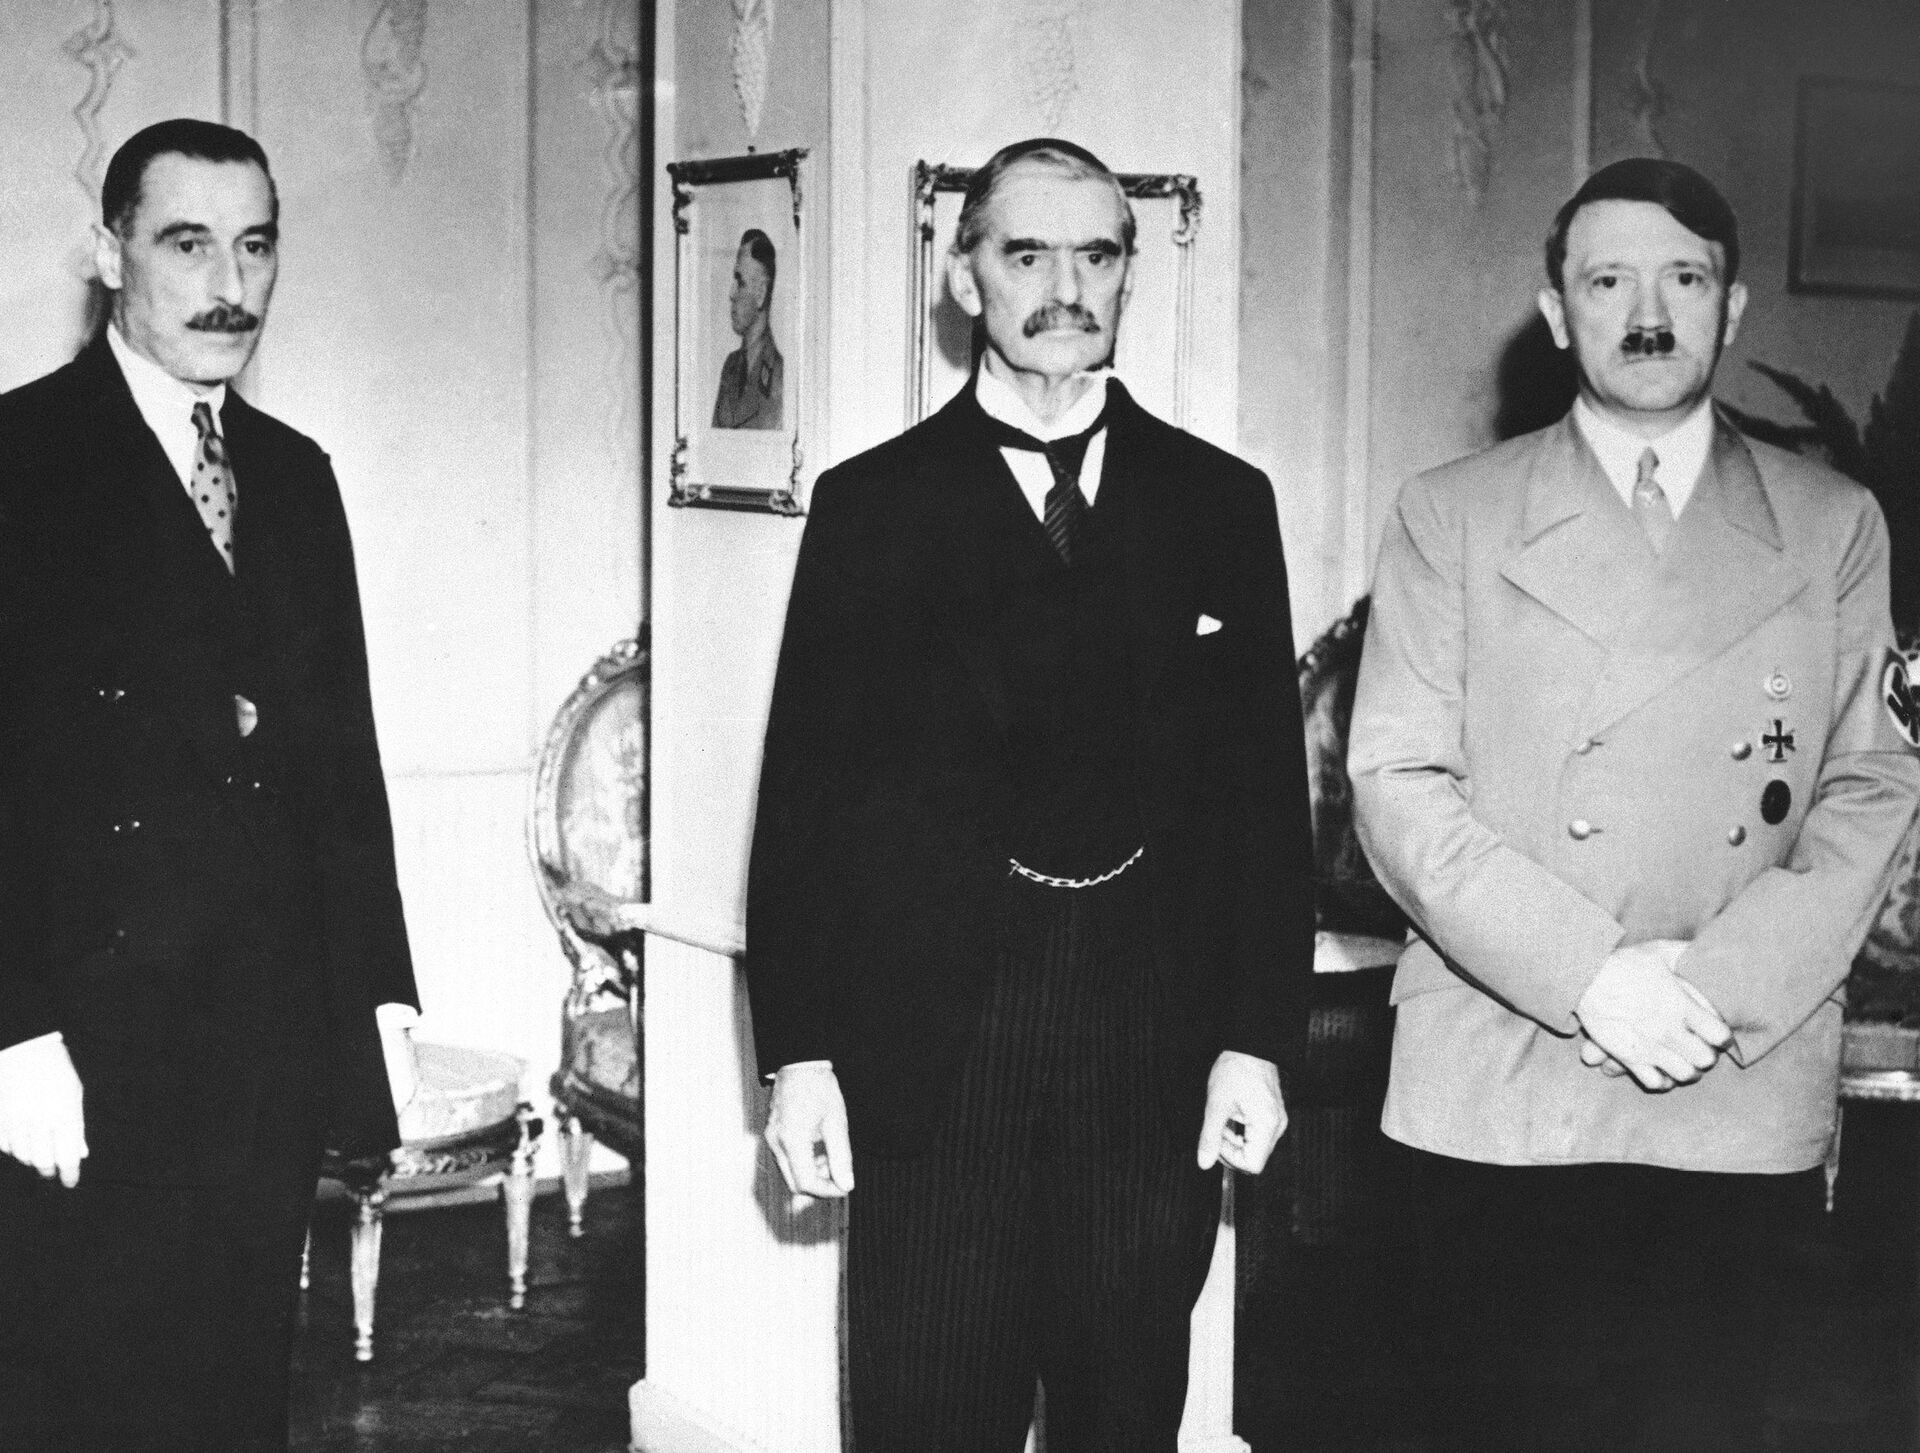 Neville Chamberlain, British prime minister, center, with Reichsfuehrer Adolf Hitler, right, at the second of their three dramatic meetings to solve the European crisis at the conclusion of the three-hour midnight conference which ended in disagreement in Hitlerís hotel room in Godesberg, Germany around Sept. 23, 1938 - Sputnik International, 1920, 07.05.2023